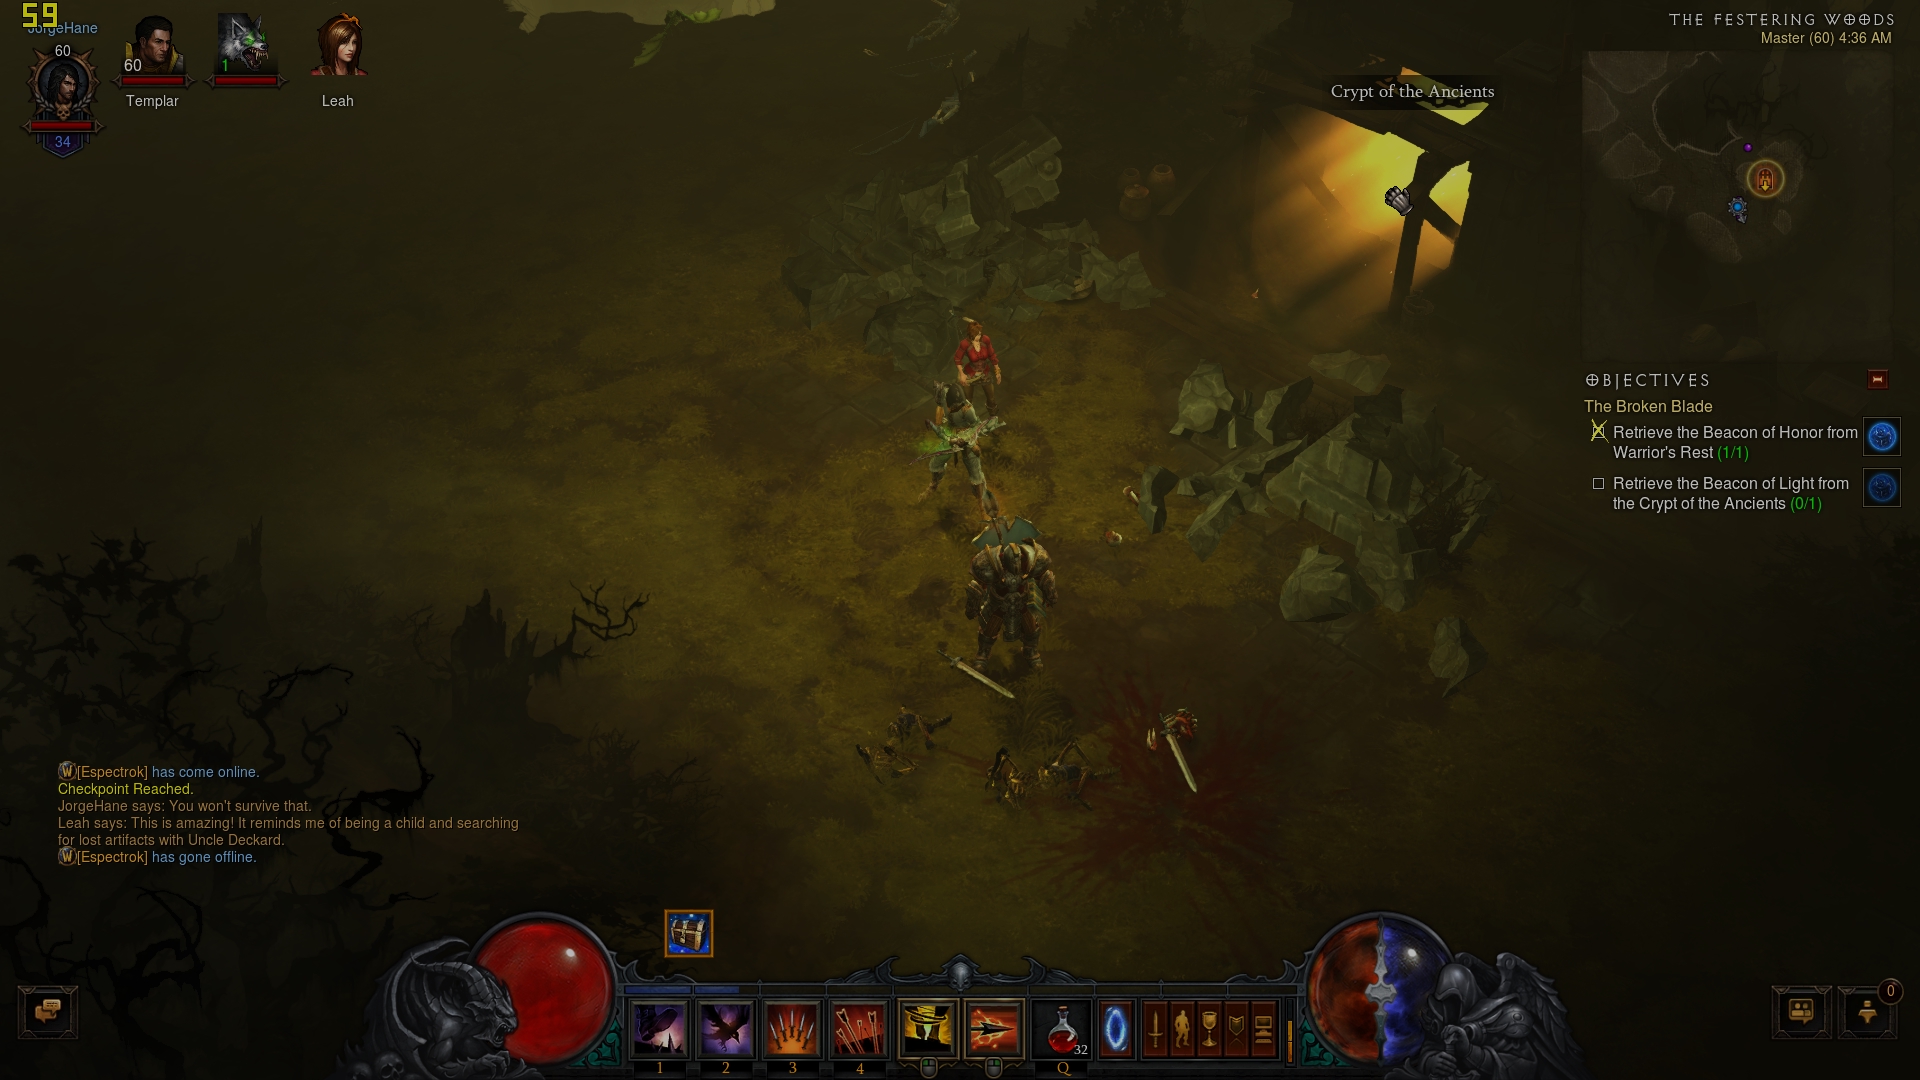 how to gain access to primal ancients in diablo 3